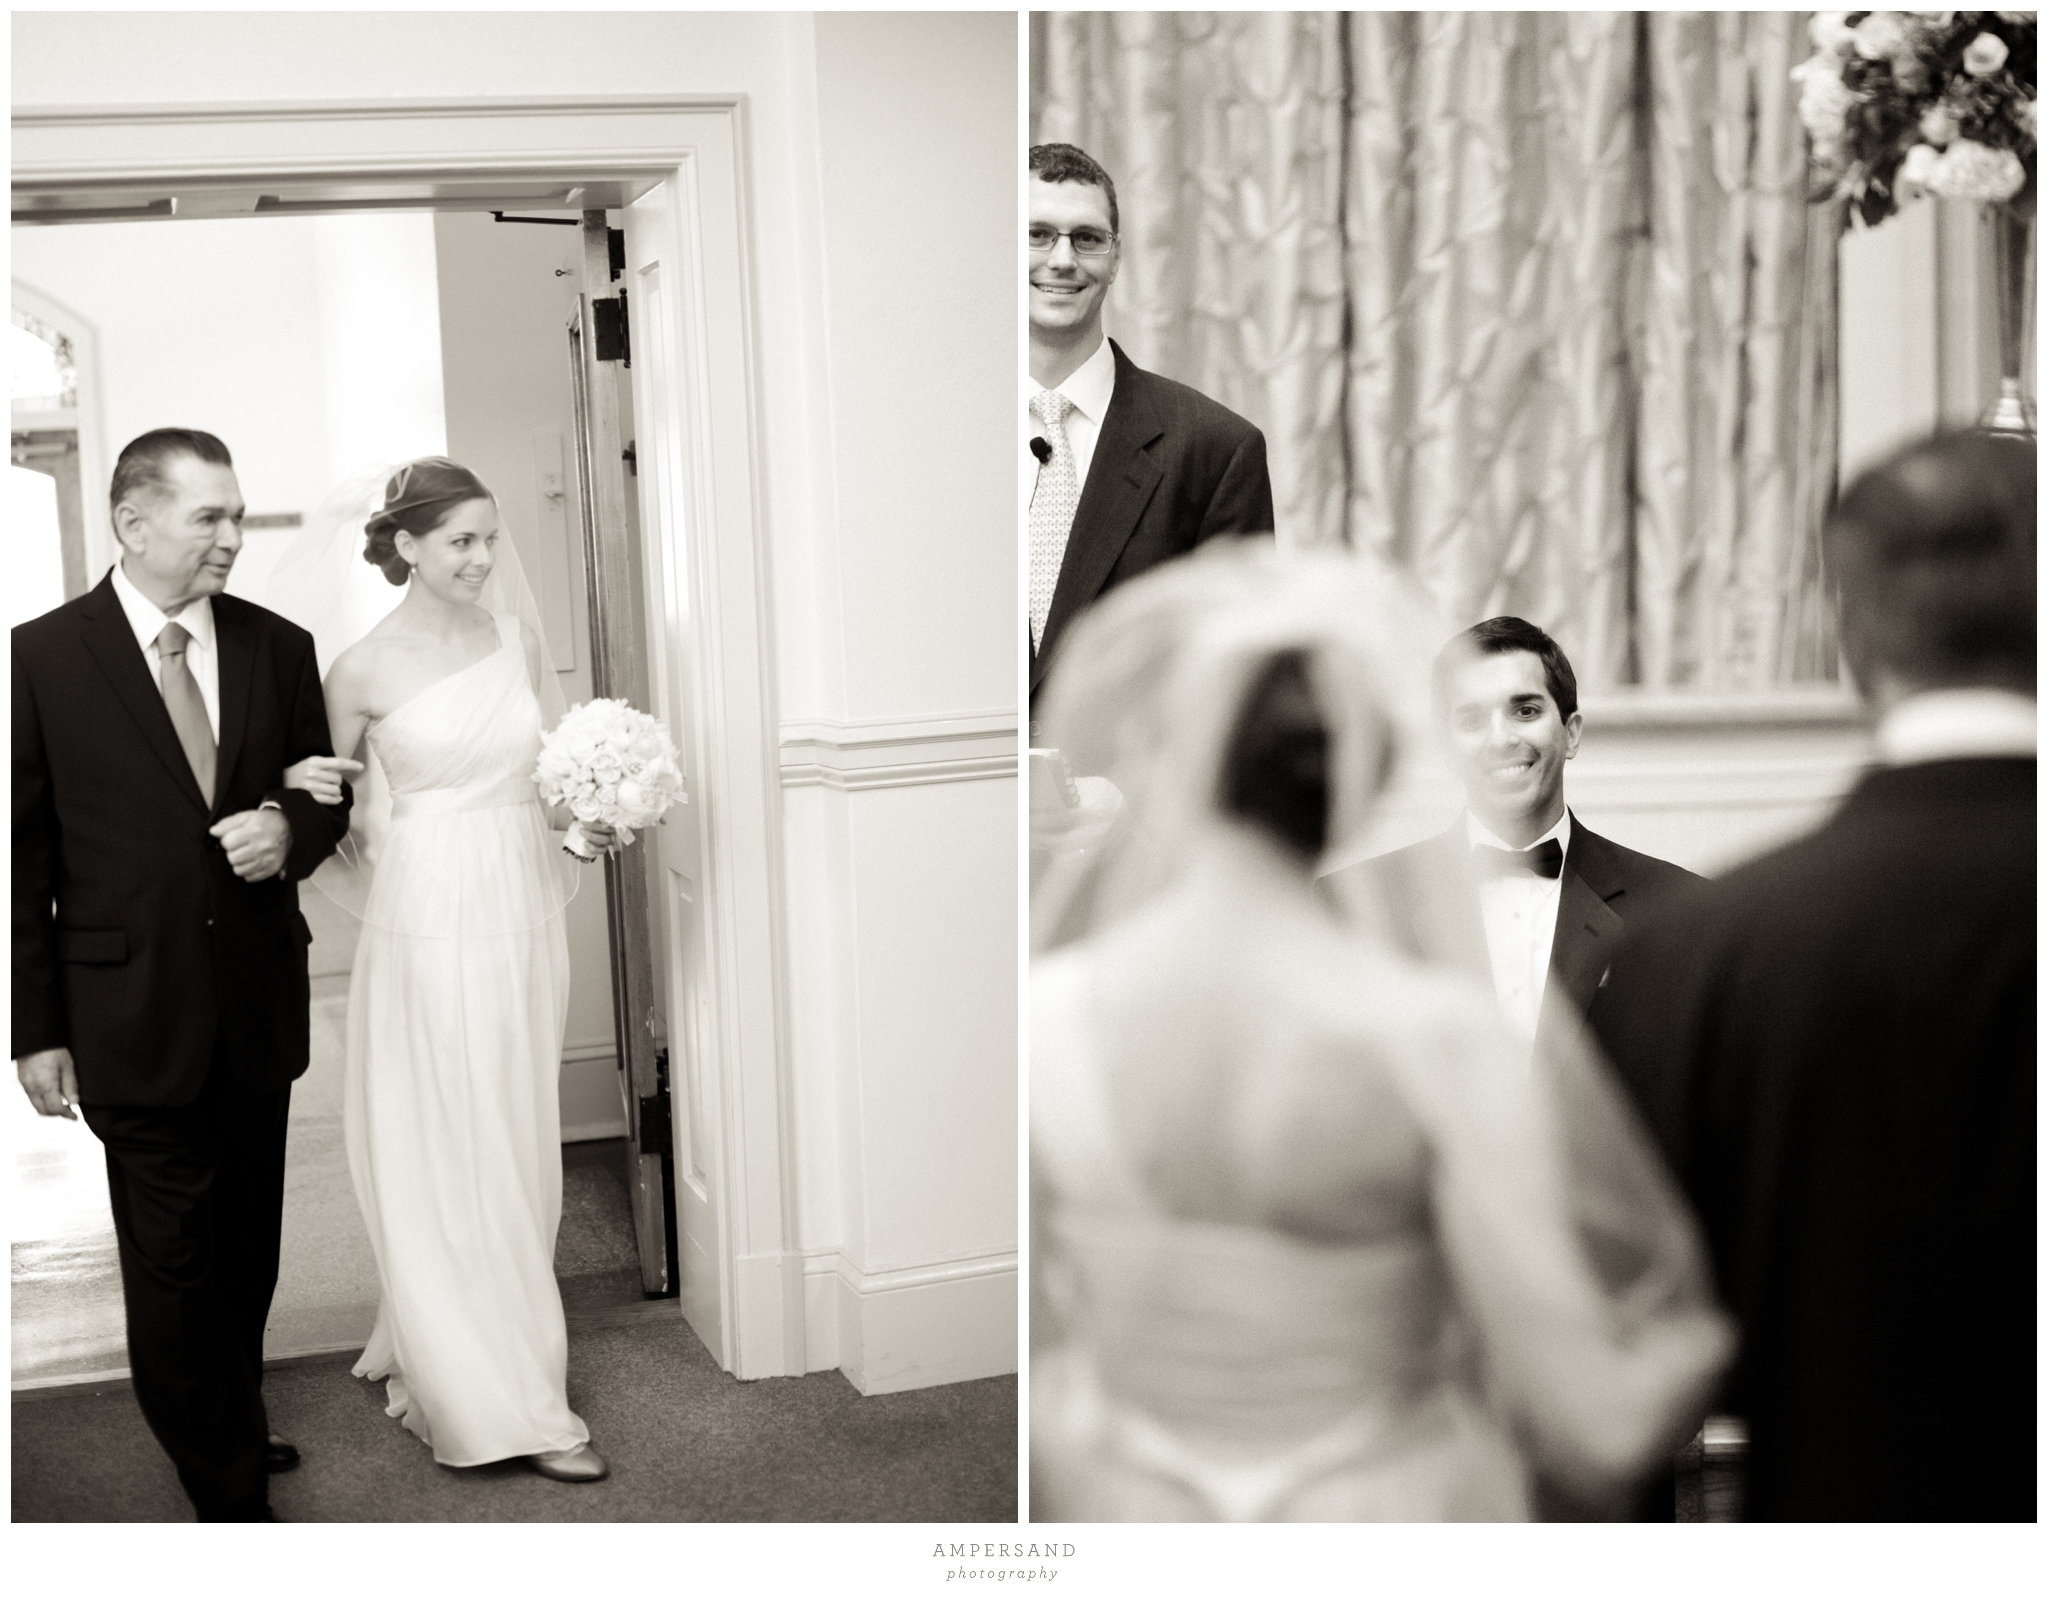 Wedding ceremony at Capitol Hill Baptist Church // Photos by Ampersand Photography